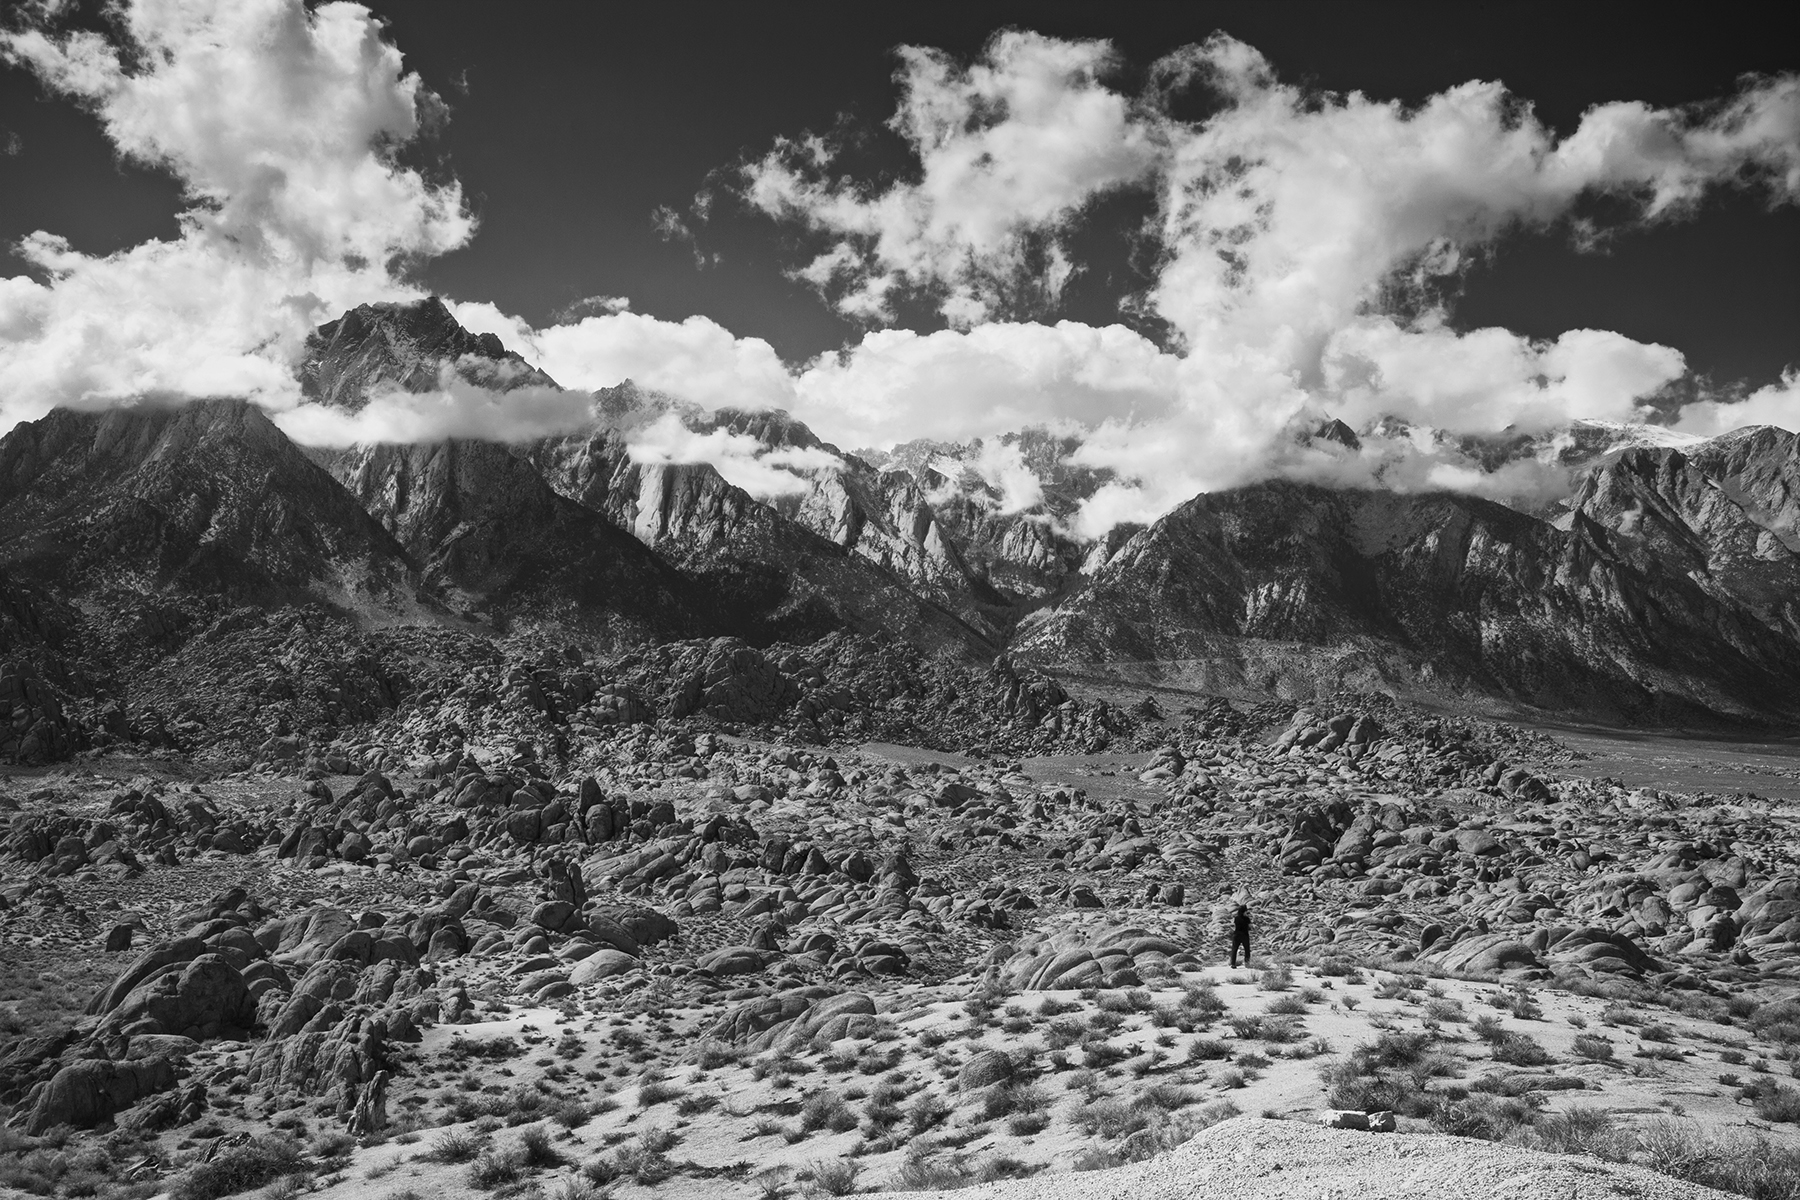 Donna Cosentino taking in the Alabama Hills with the Eastern Sierras as the backdrop. Photo by Dan Nougier